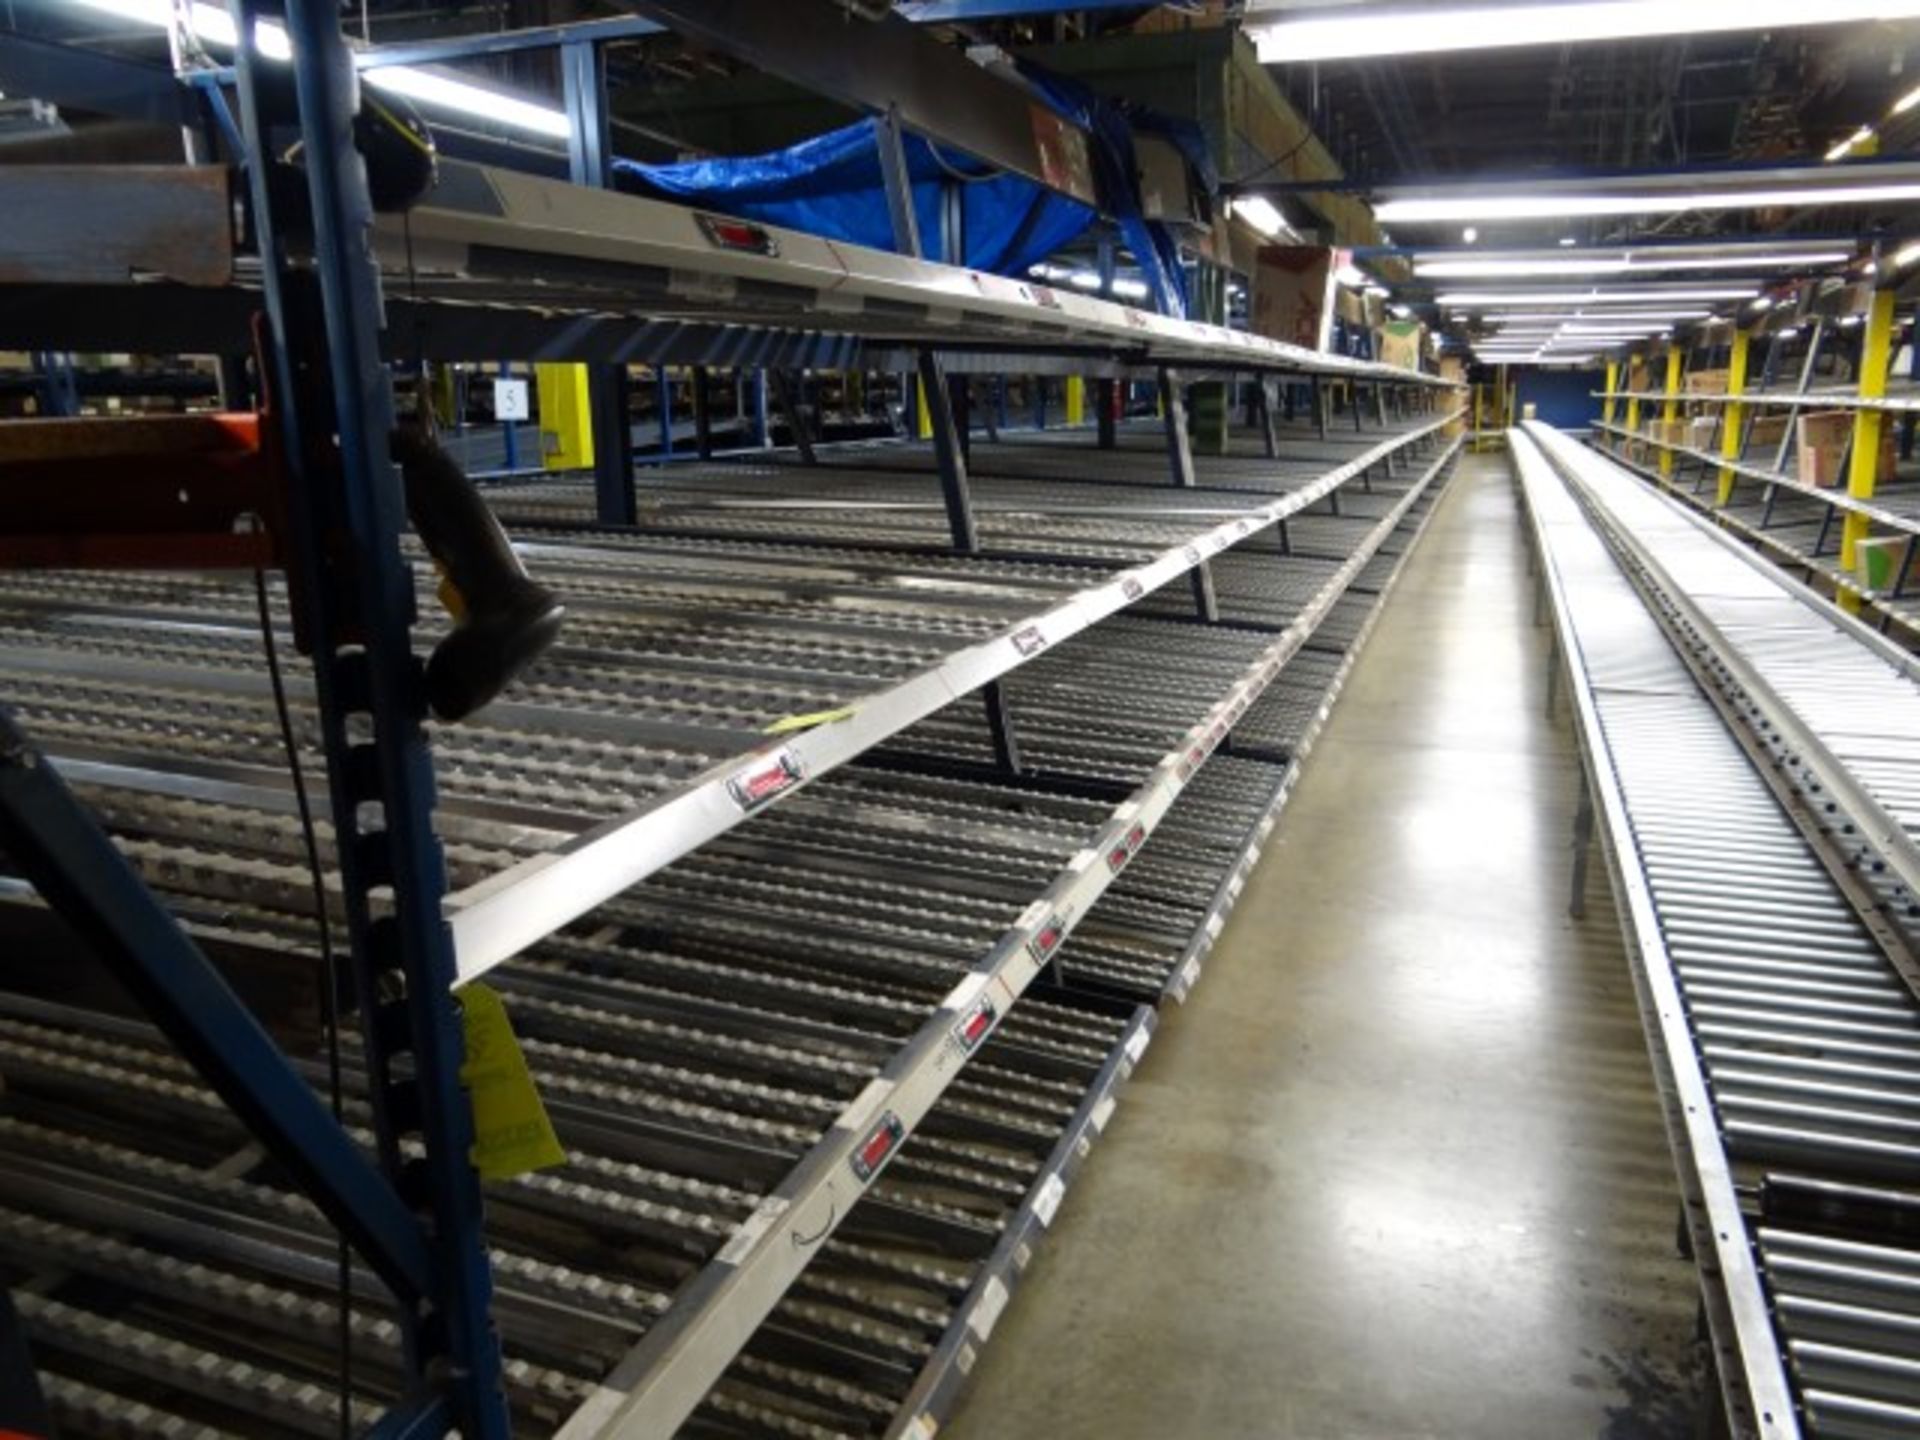 Tech King Cigarette Pick to Light System with 6 Pick Stations, Conveyors, Flow Racks, Box Tram and - Image 55 of 57